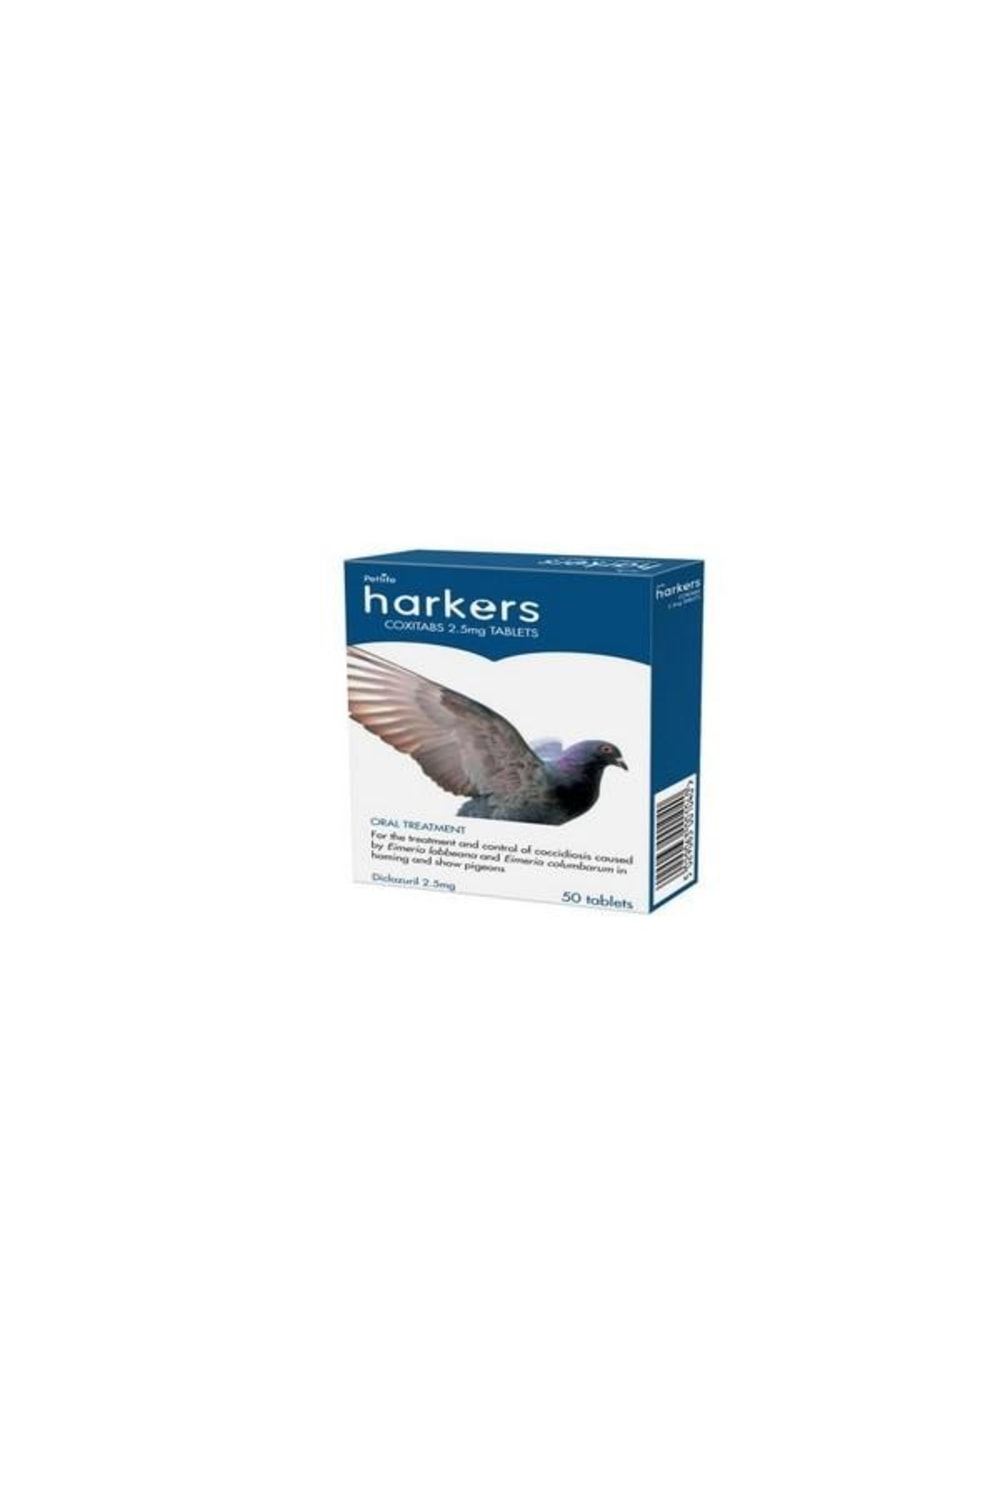 Harkers Coxi Pigeon Oral Treatment (50 Tablets) (May Vary) (One Size)